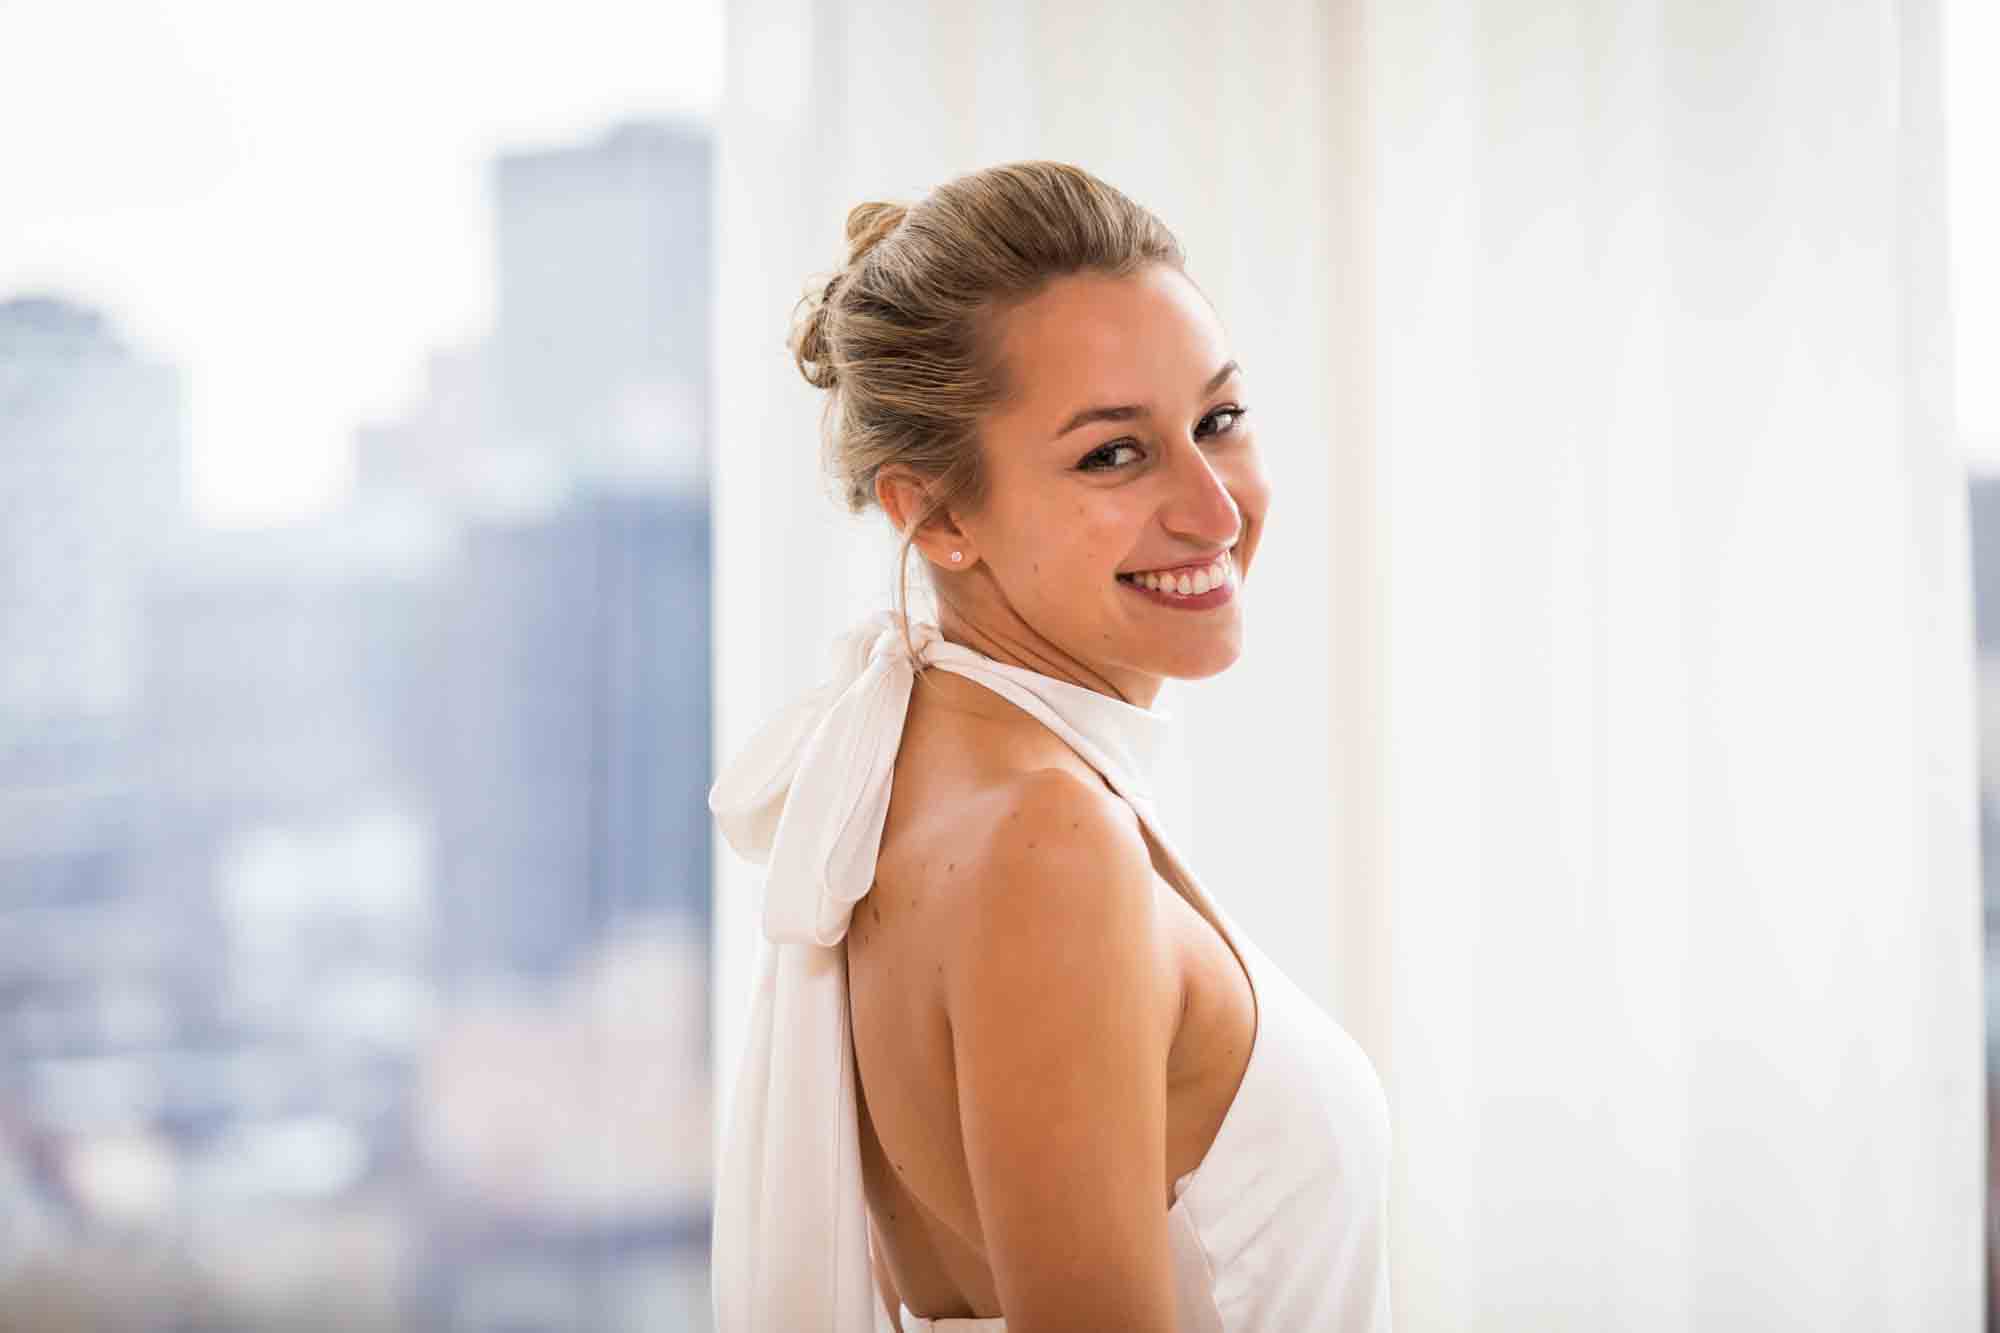 Smiling bride wearing sleeveless dress with hair up in front of white curtain